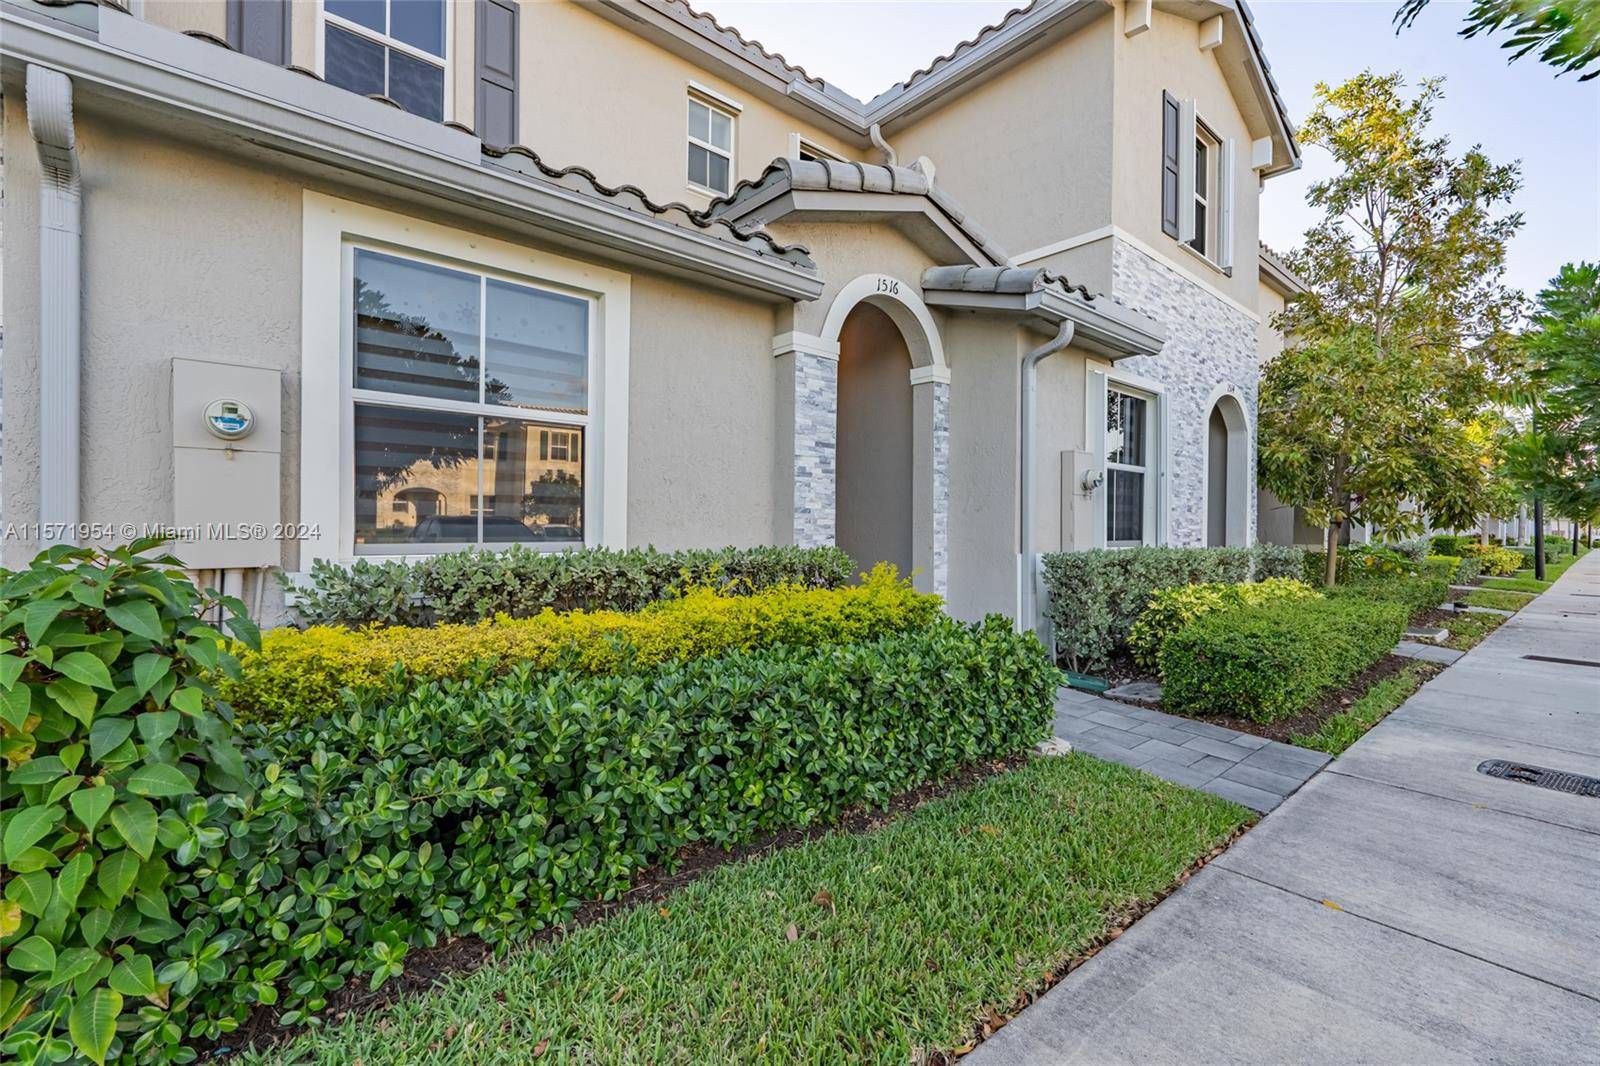 Charming townhome in Homestead, with 3 bedrooms and 3 full bathrooms.